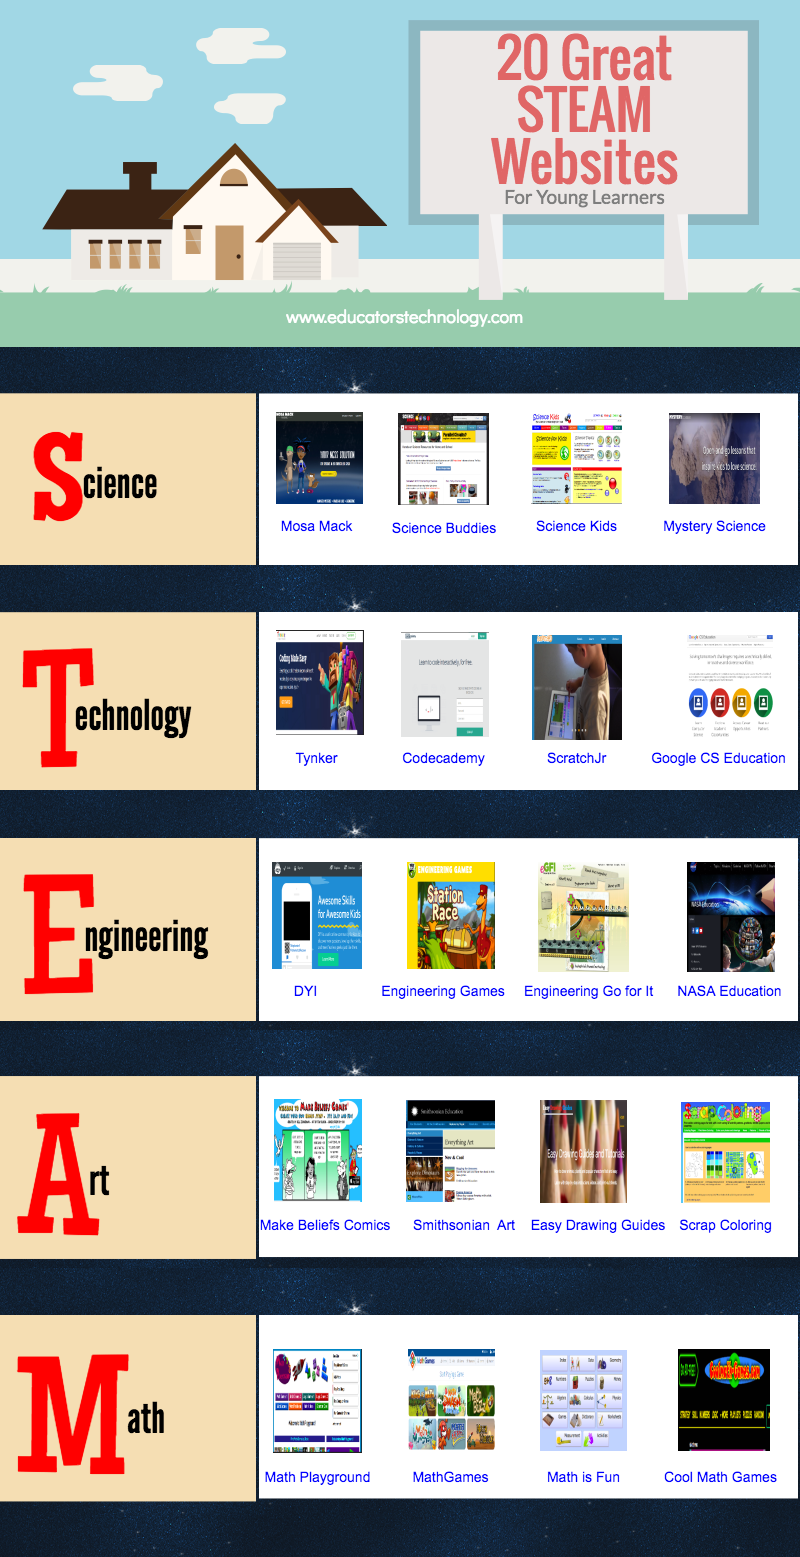 20 Great STEAM Websites for Young Learners